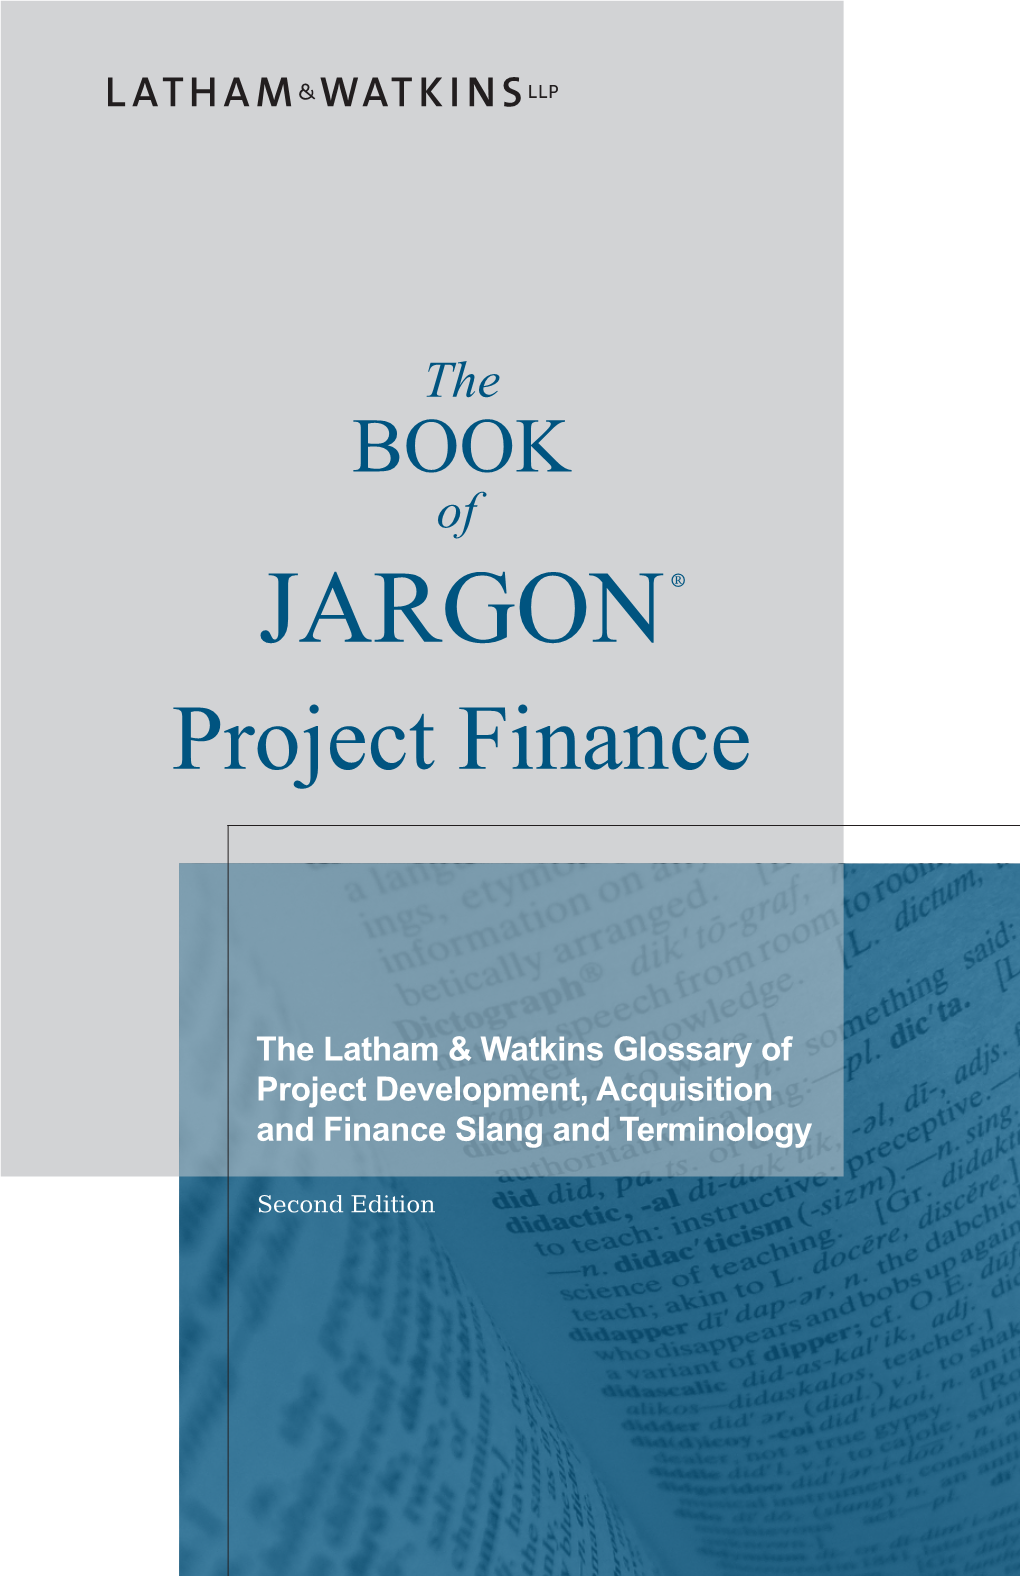 The BOOK of JARGON ® Project Finance